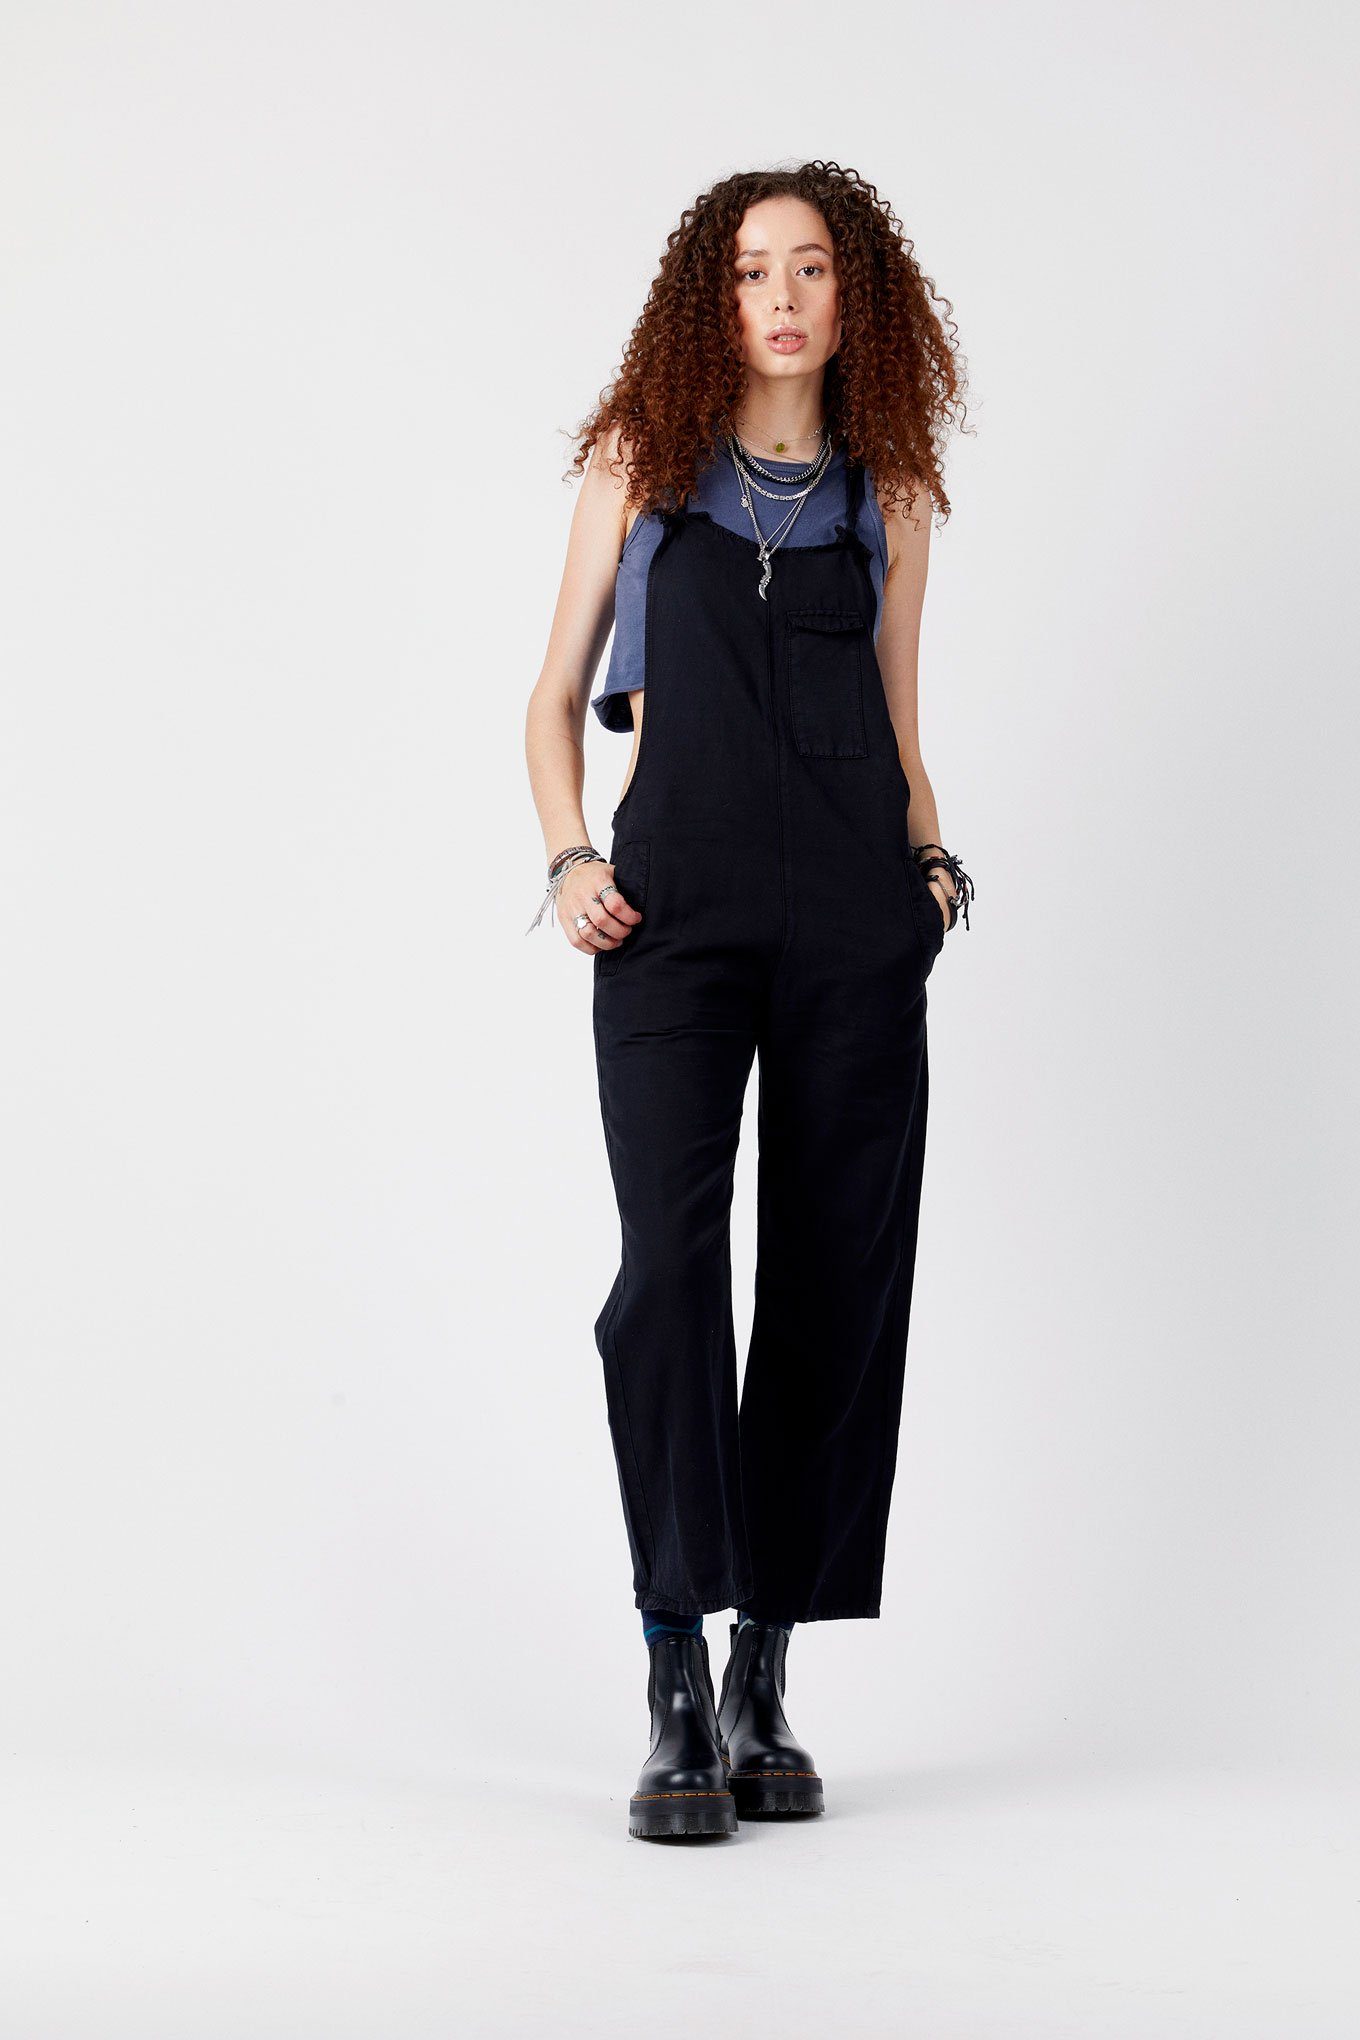 MARY-LOU Black - GOTS Organic Cotton Dungaress by Flax & Loom, SIZE 5 / UK 16 / EUR 44